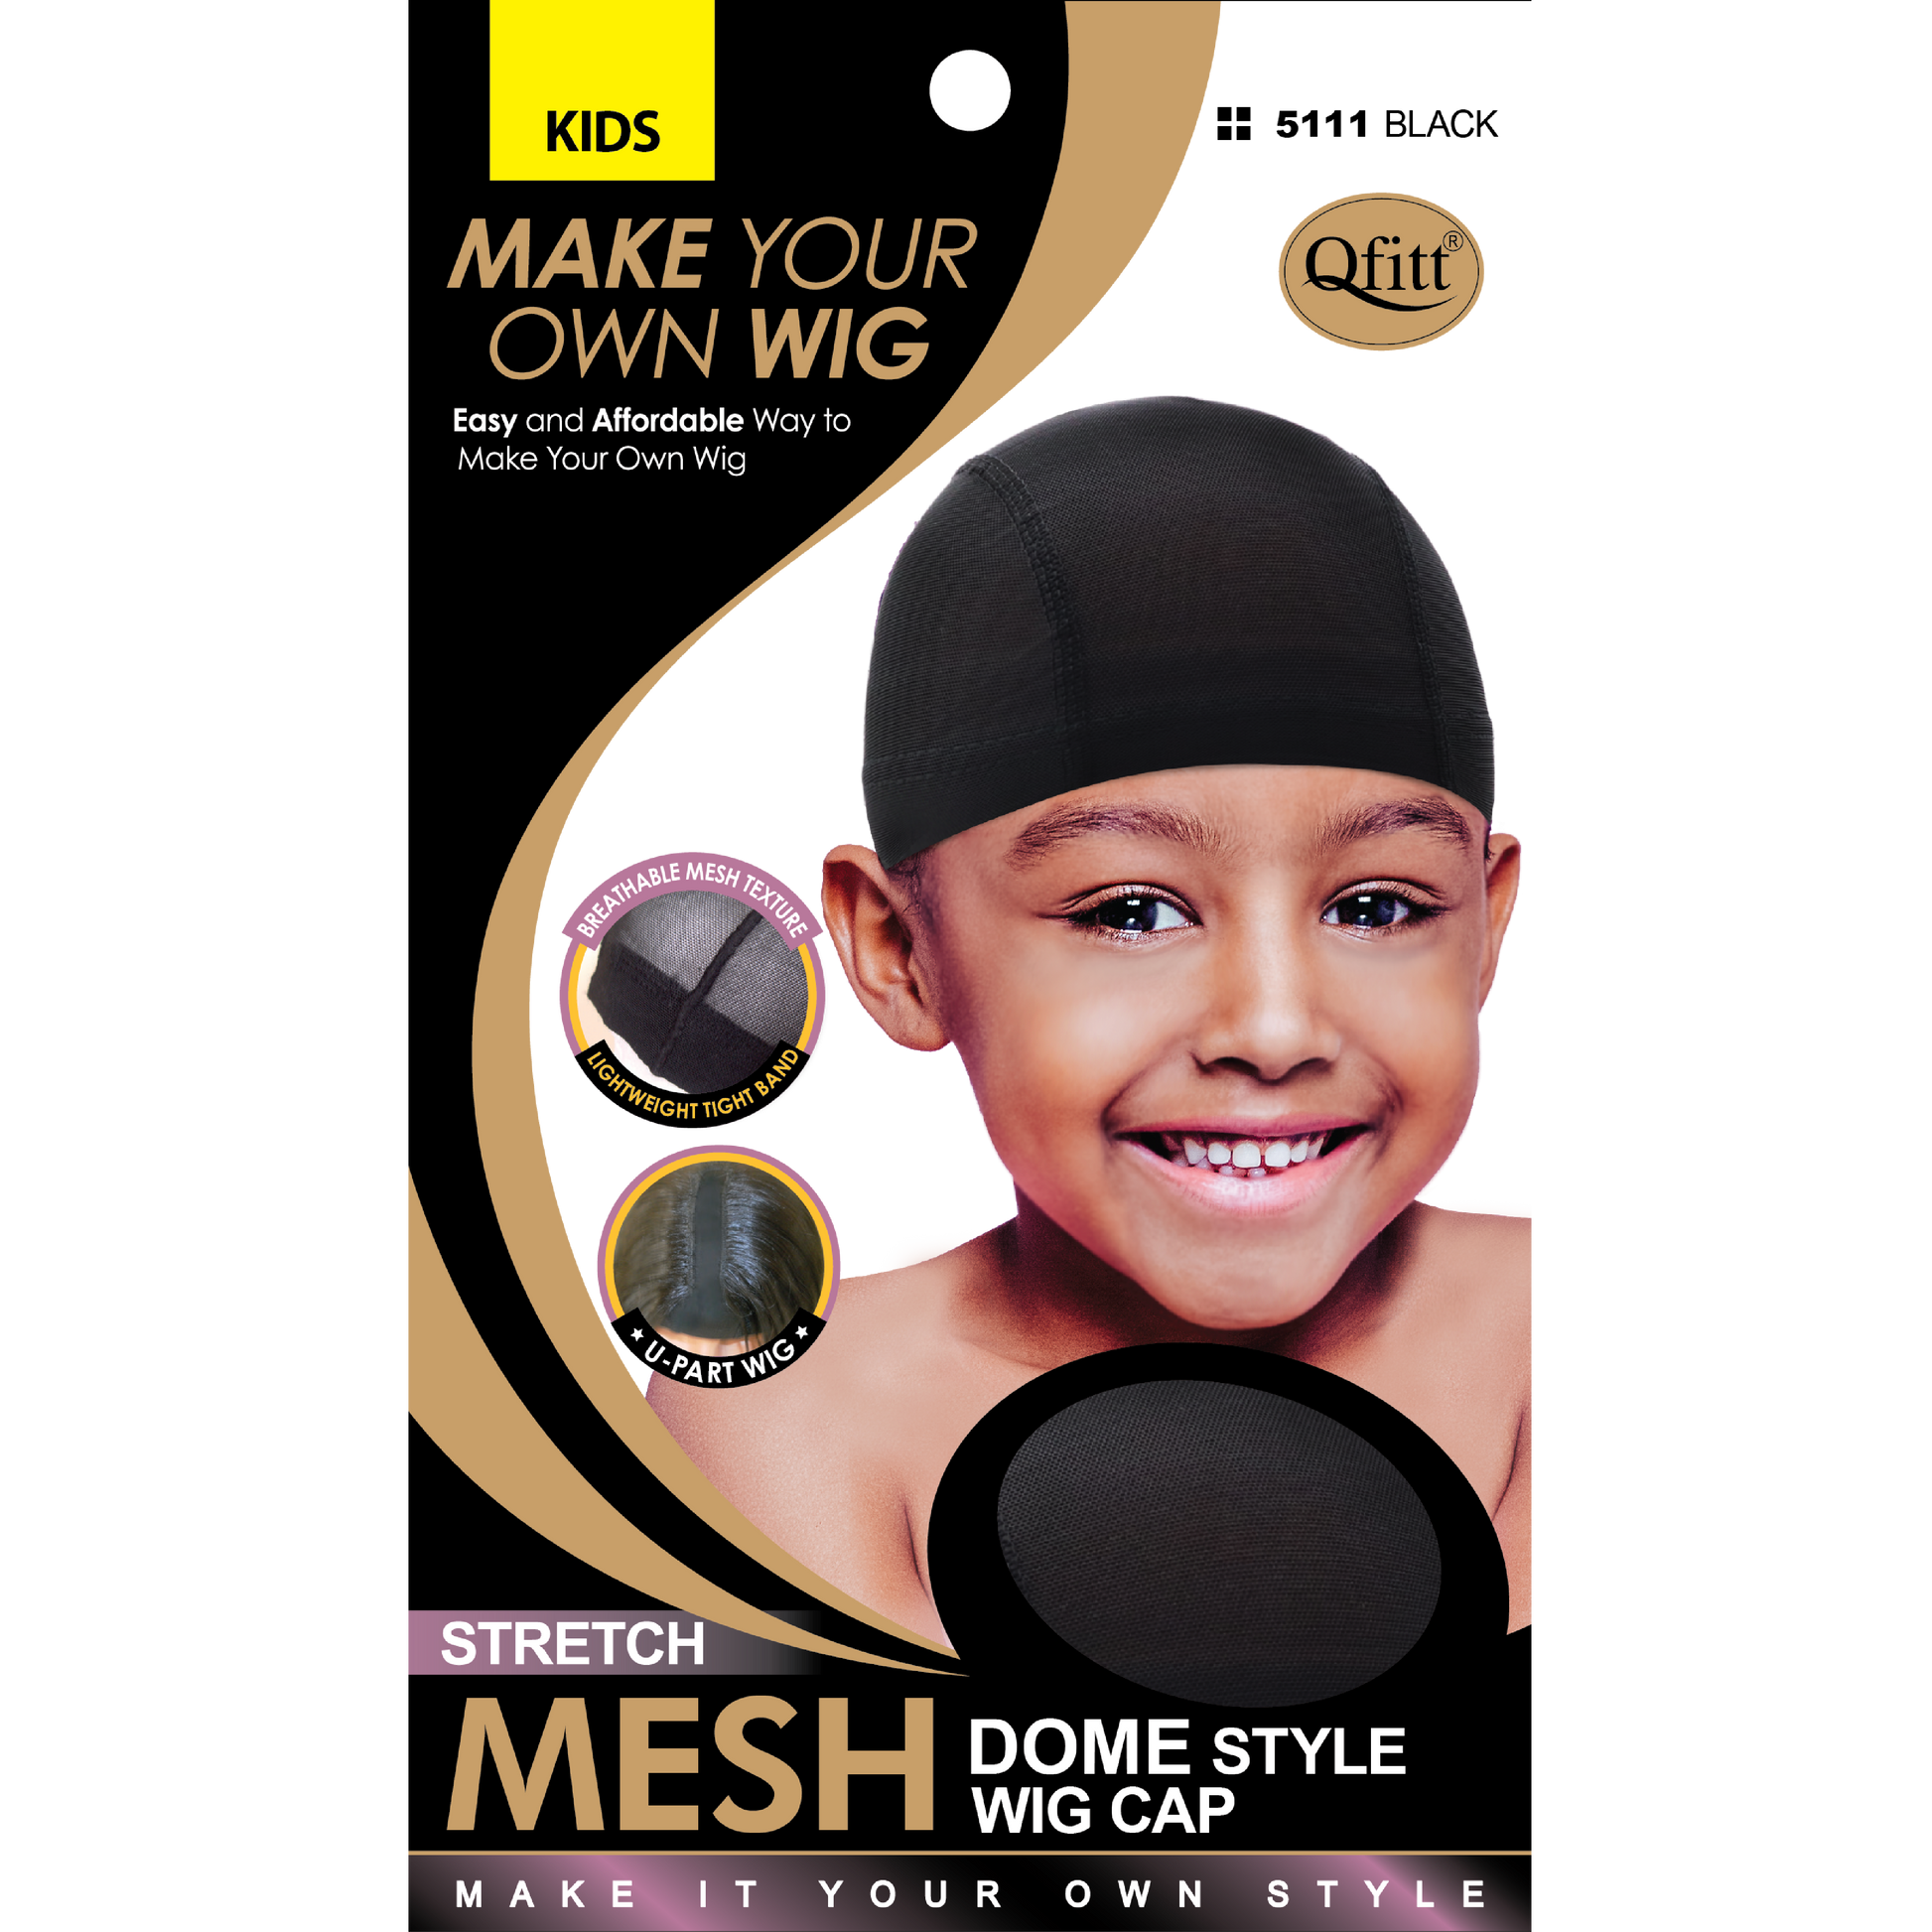 OMG THIS WIG KIT IS EVERYTHING!!  EZ DIY Customized Wig Kit by